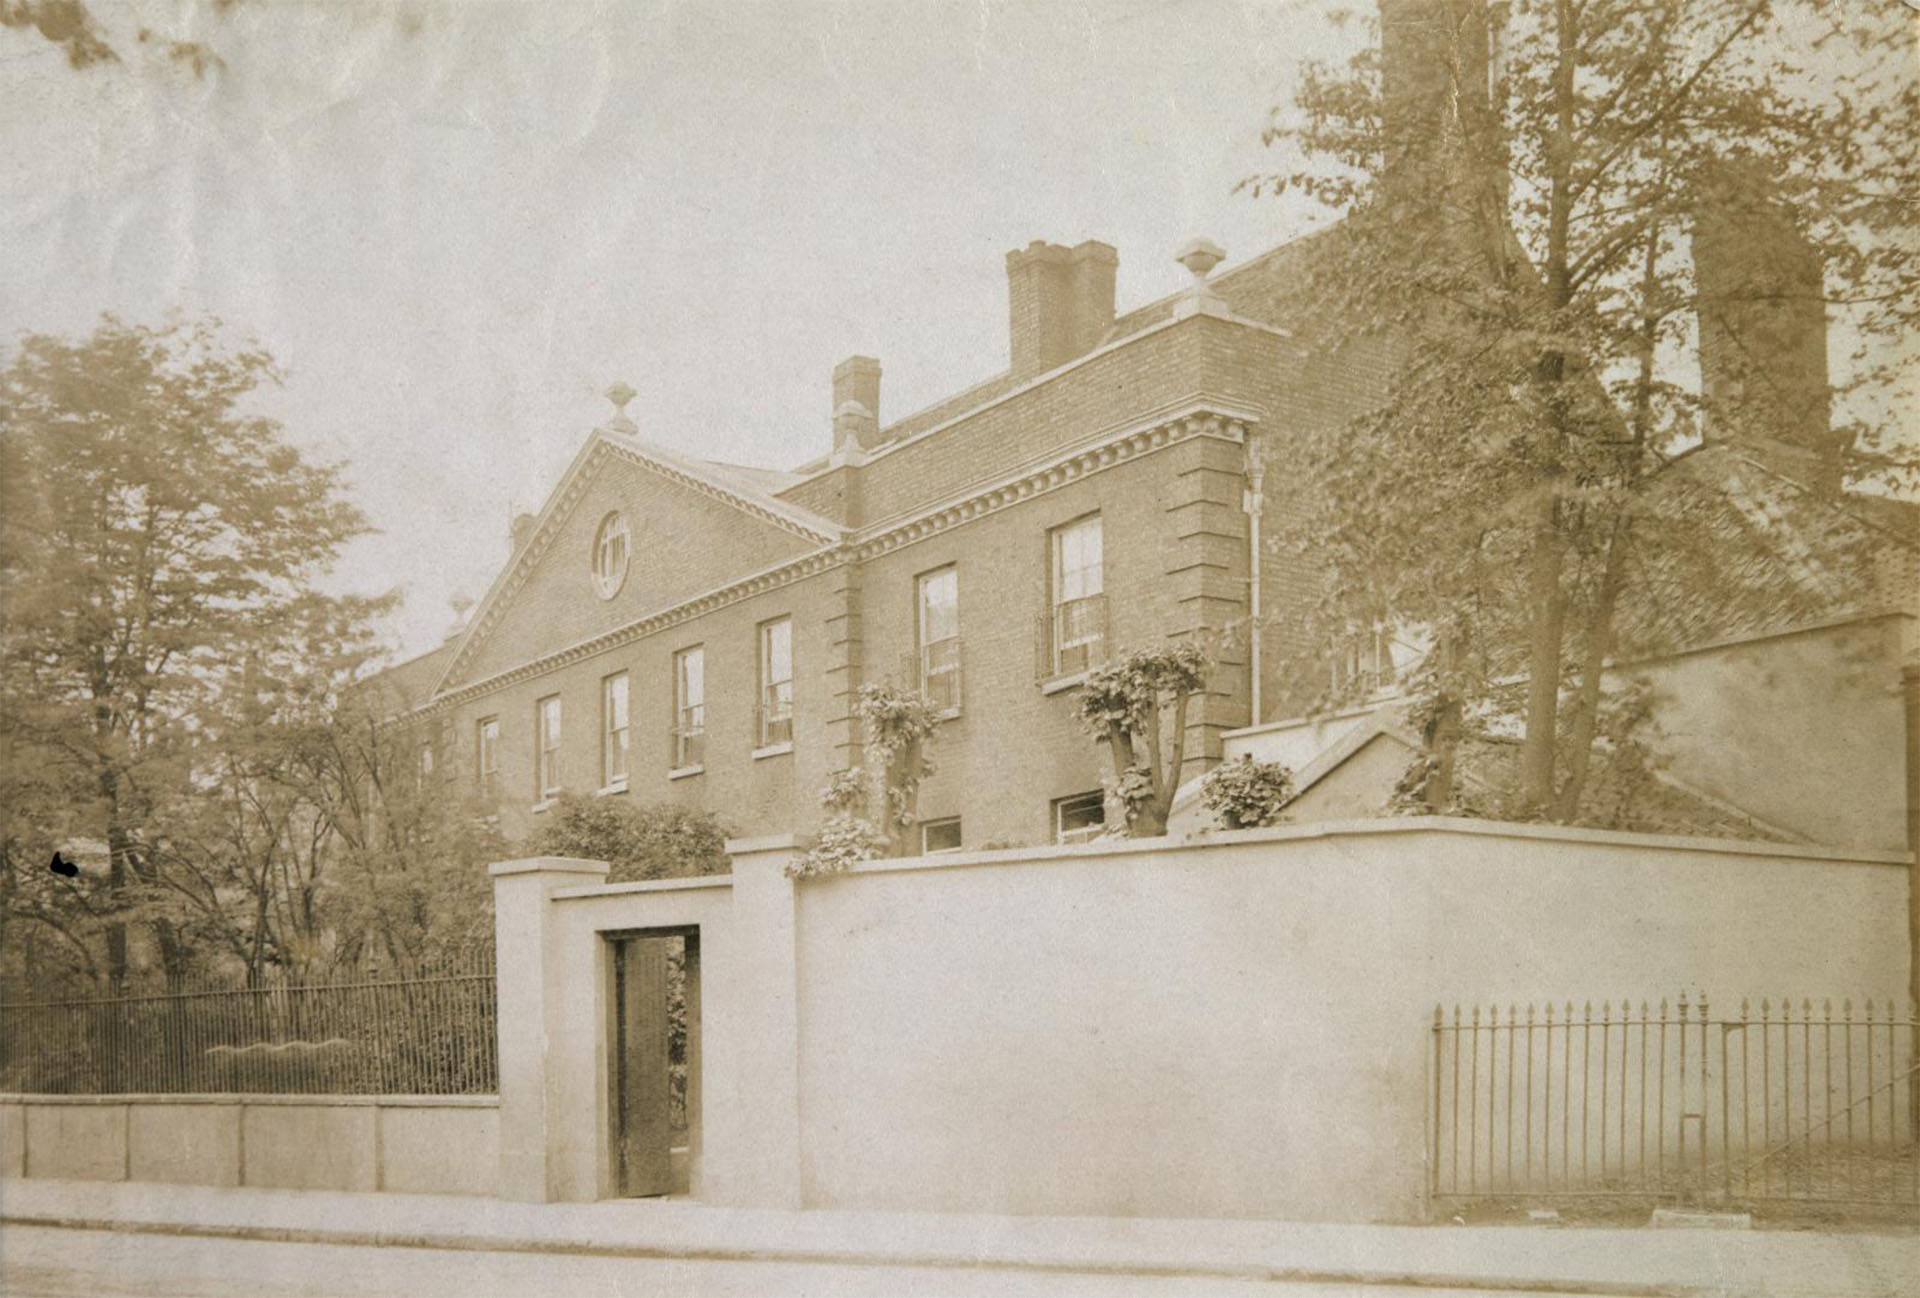 Exterior view of Brooke House